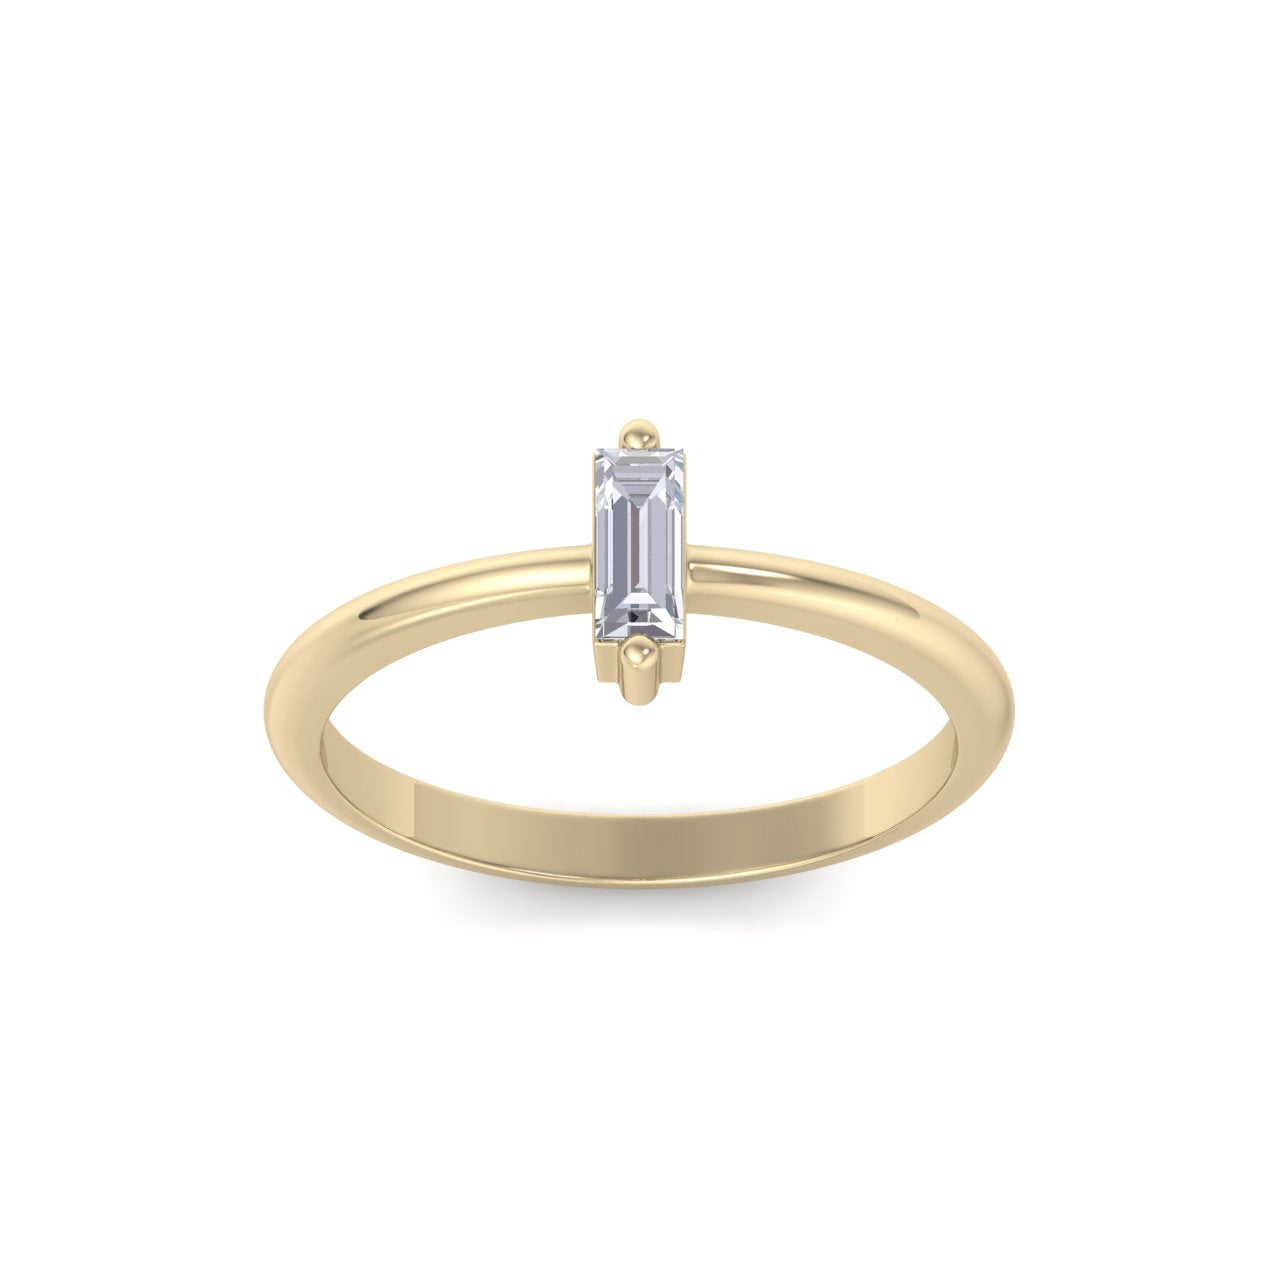 Baguette shaped petite diamond ring in white gold with white diamonds of 0.25 ct in weight